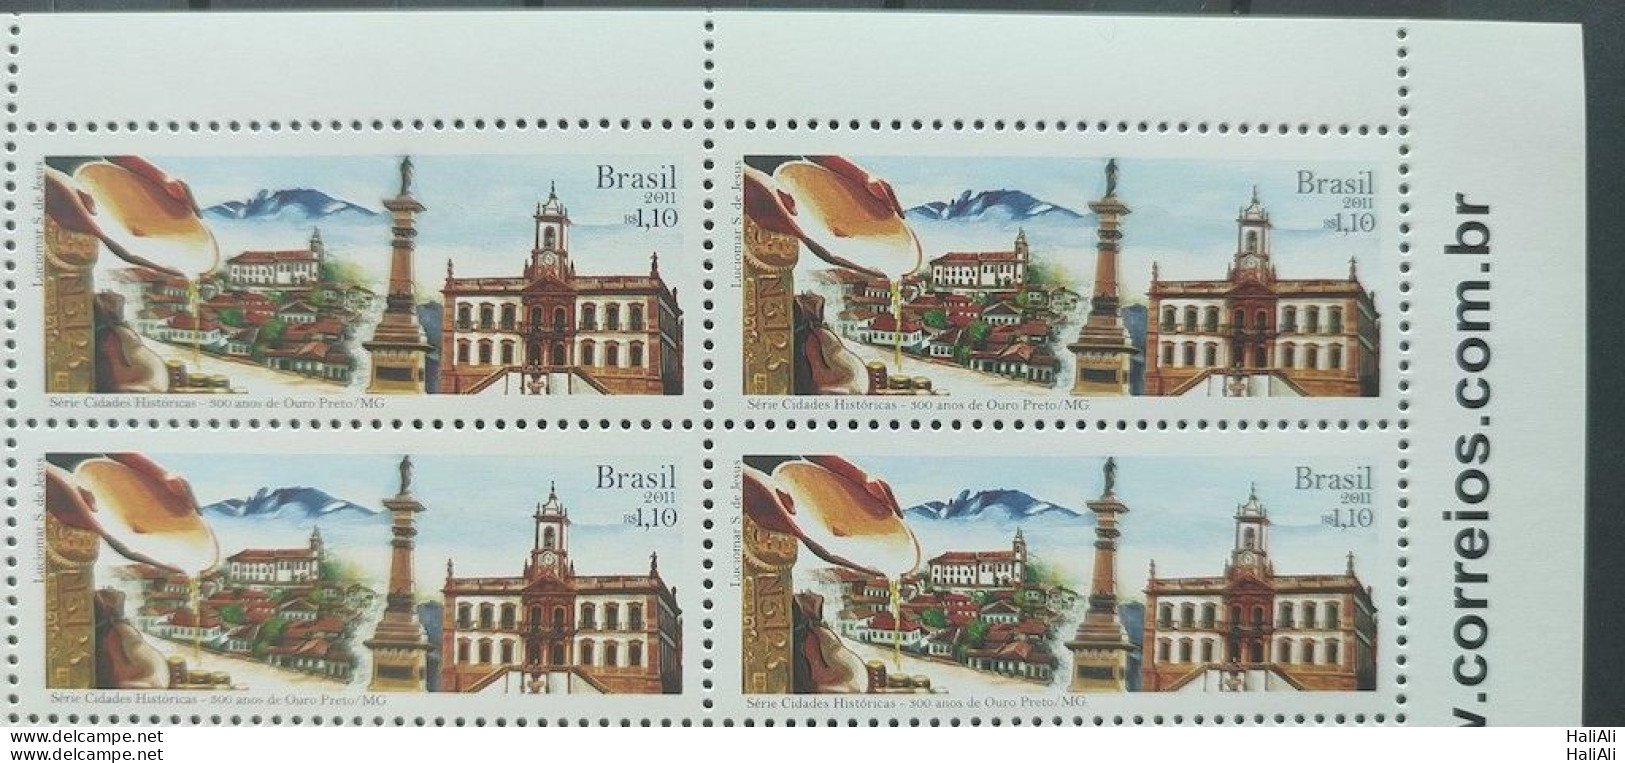 C 3097 Brazil Stamp Historical Cities Ouro Preto MG 2011 Block Of 4 Vignette Site - Neufs